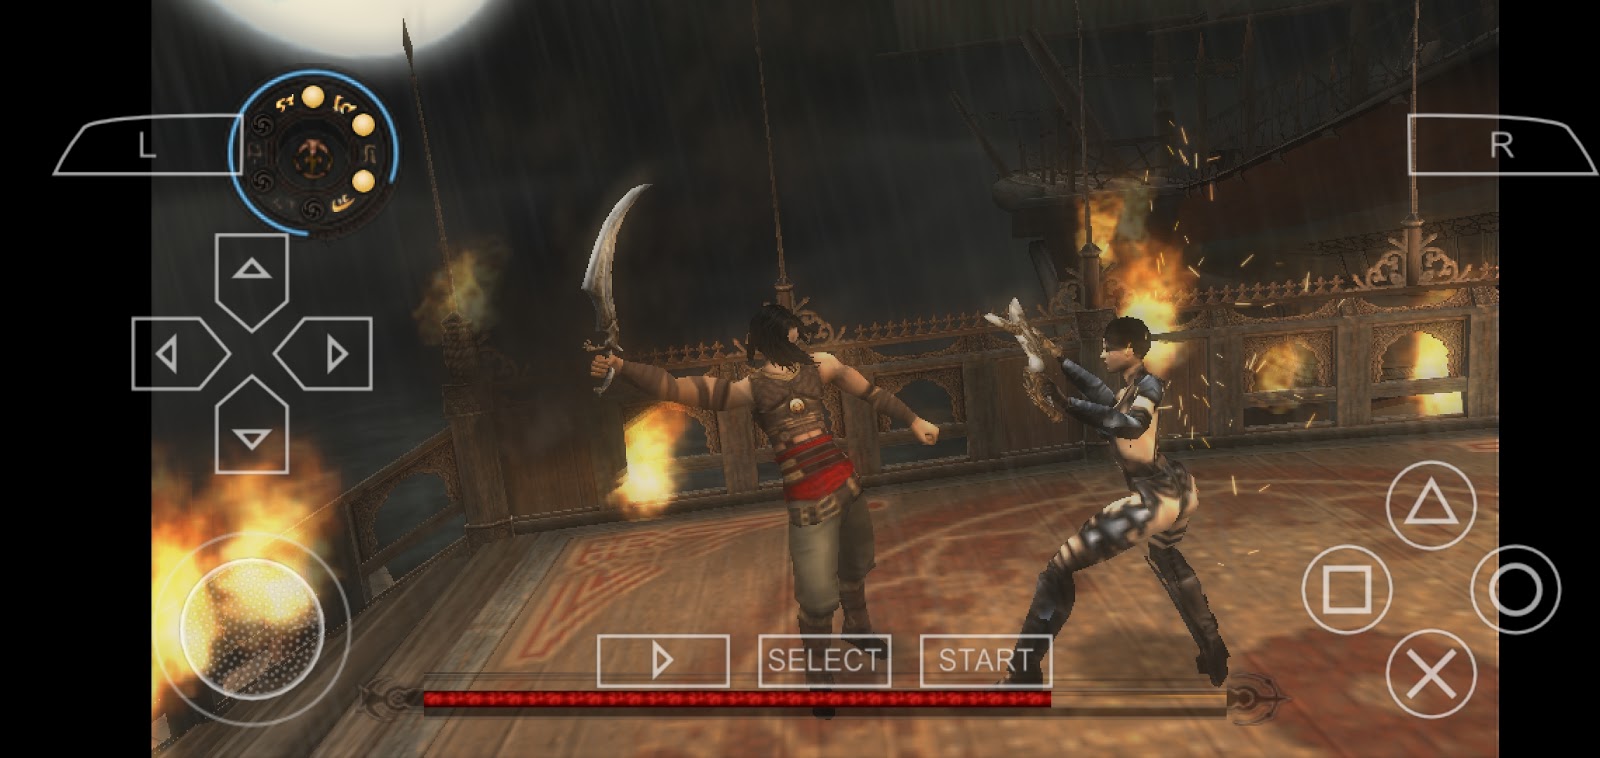 Ppsspp kingted - Name:prince of persia revelation